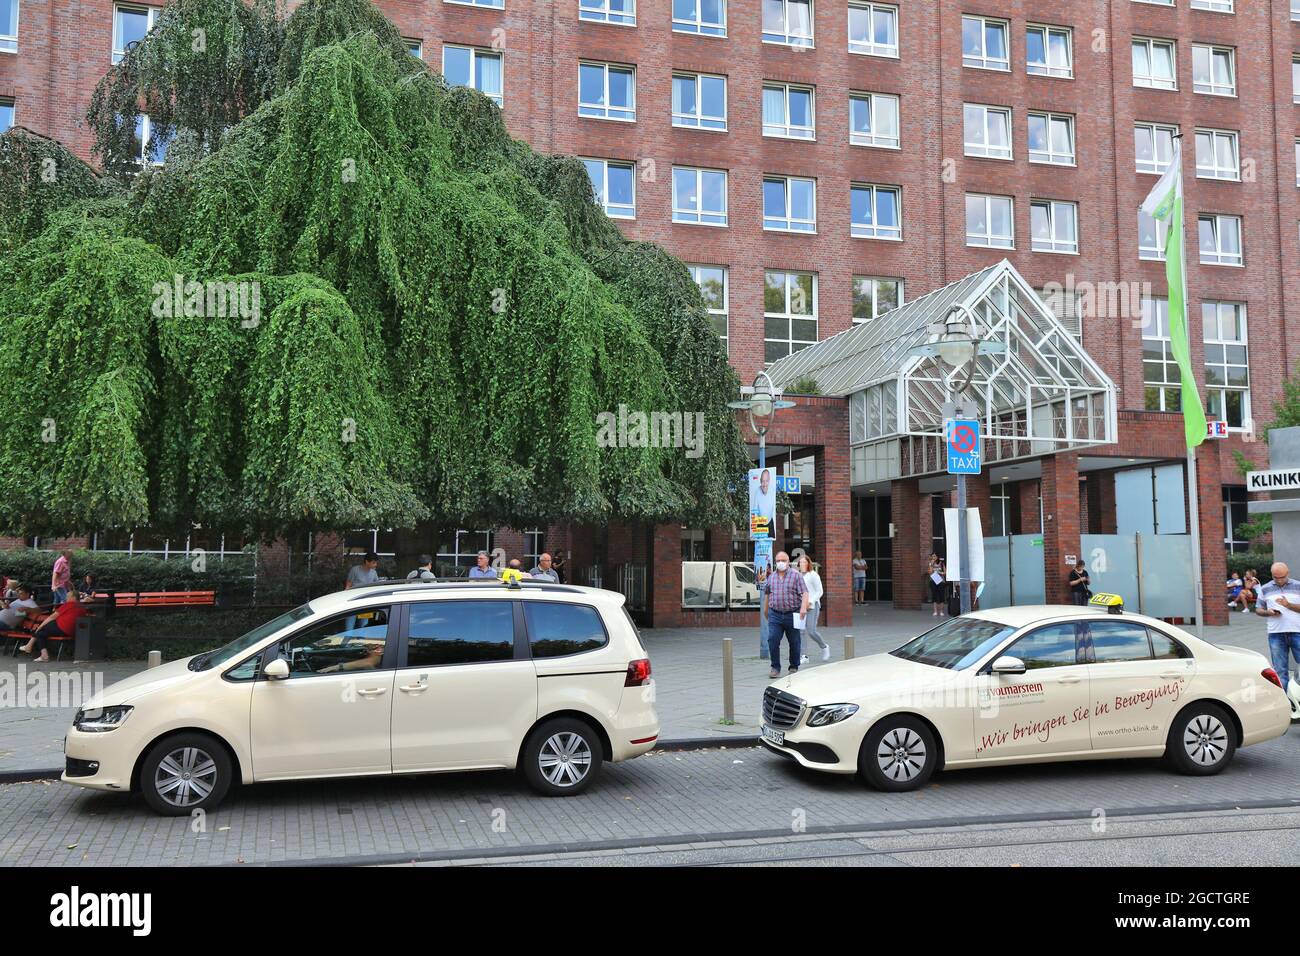 DORTMUND, GERMANY - SEPTEMBER 16, 2020: Taxi cabs parked in front of Klinikum Dortmund hospital in Germany. It is a municipal general hospital for Dor Stock Photo